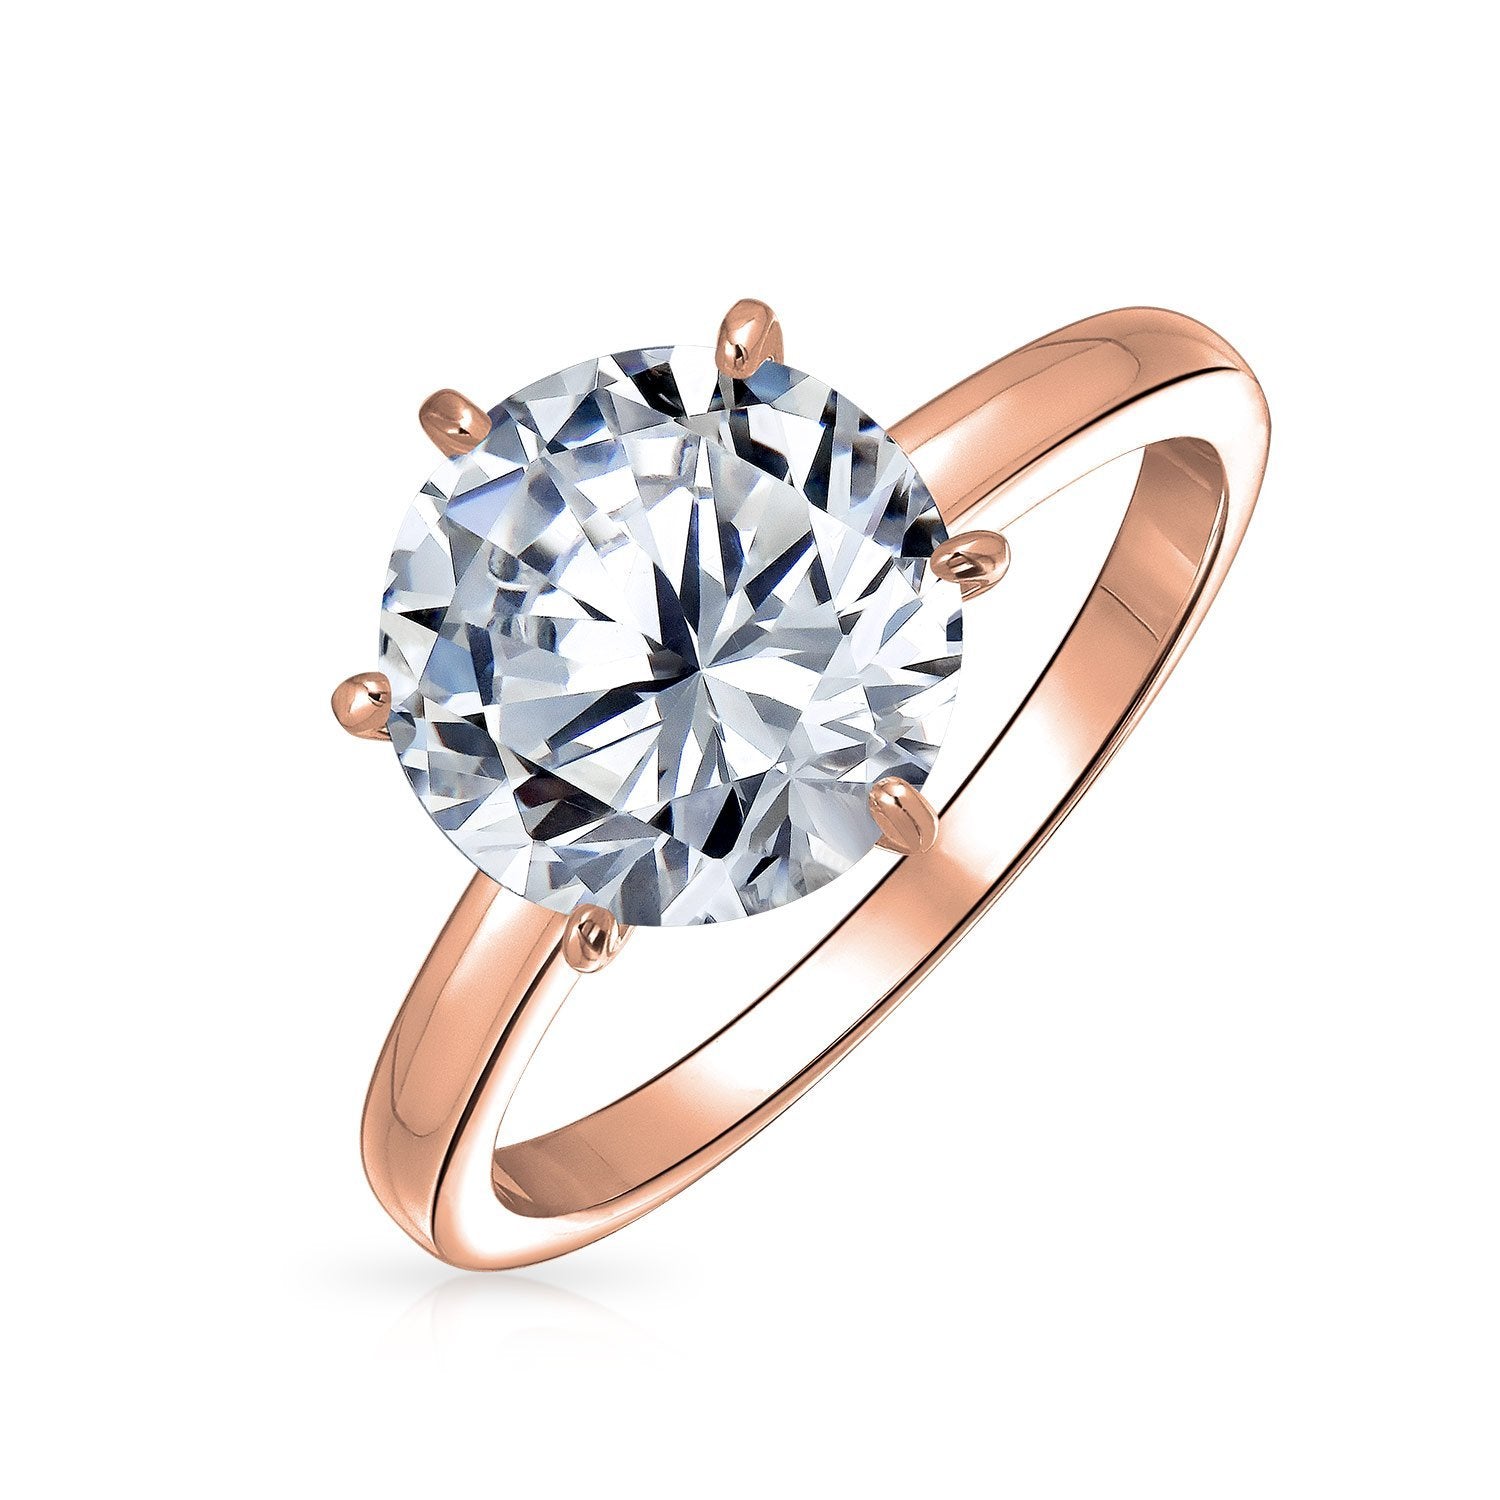 3CT Solitaire CZ Engagement Ring Sterling Silver Rose Gold Plated - Joyeria Lady